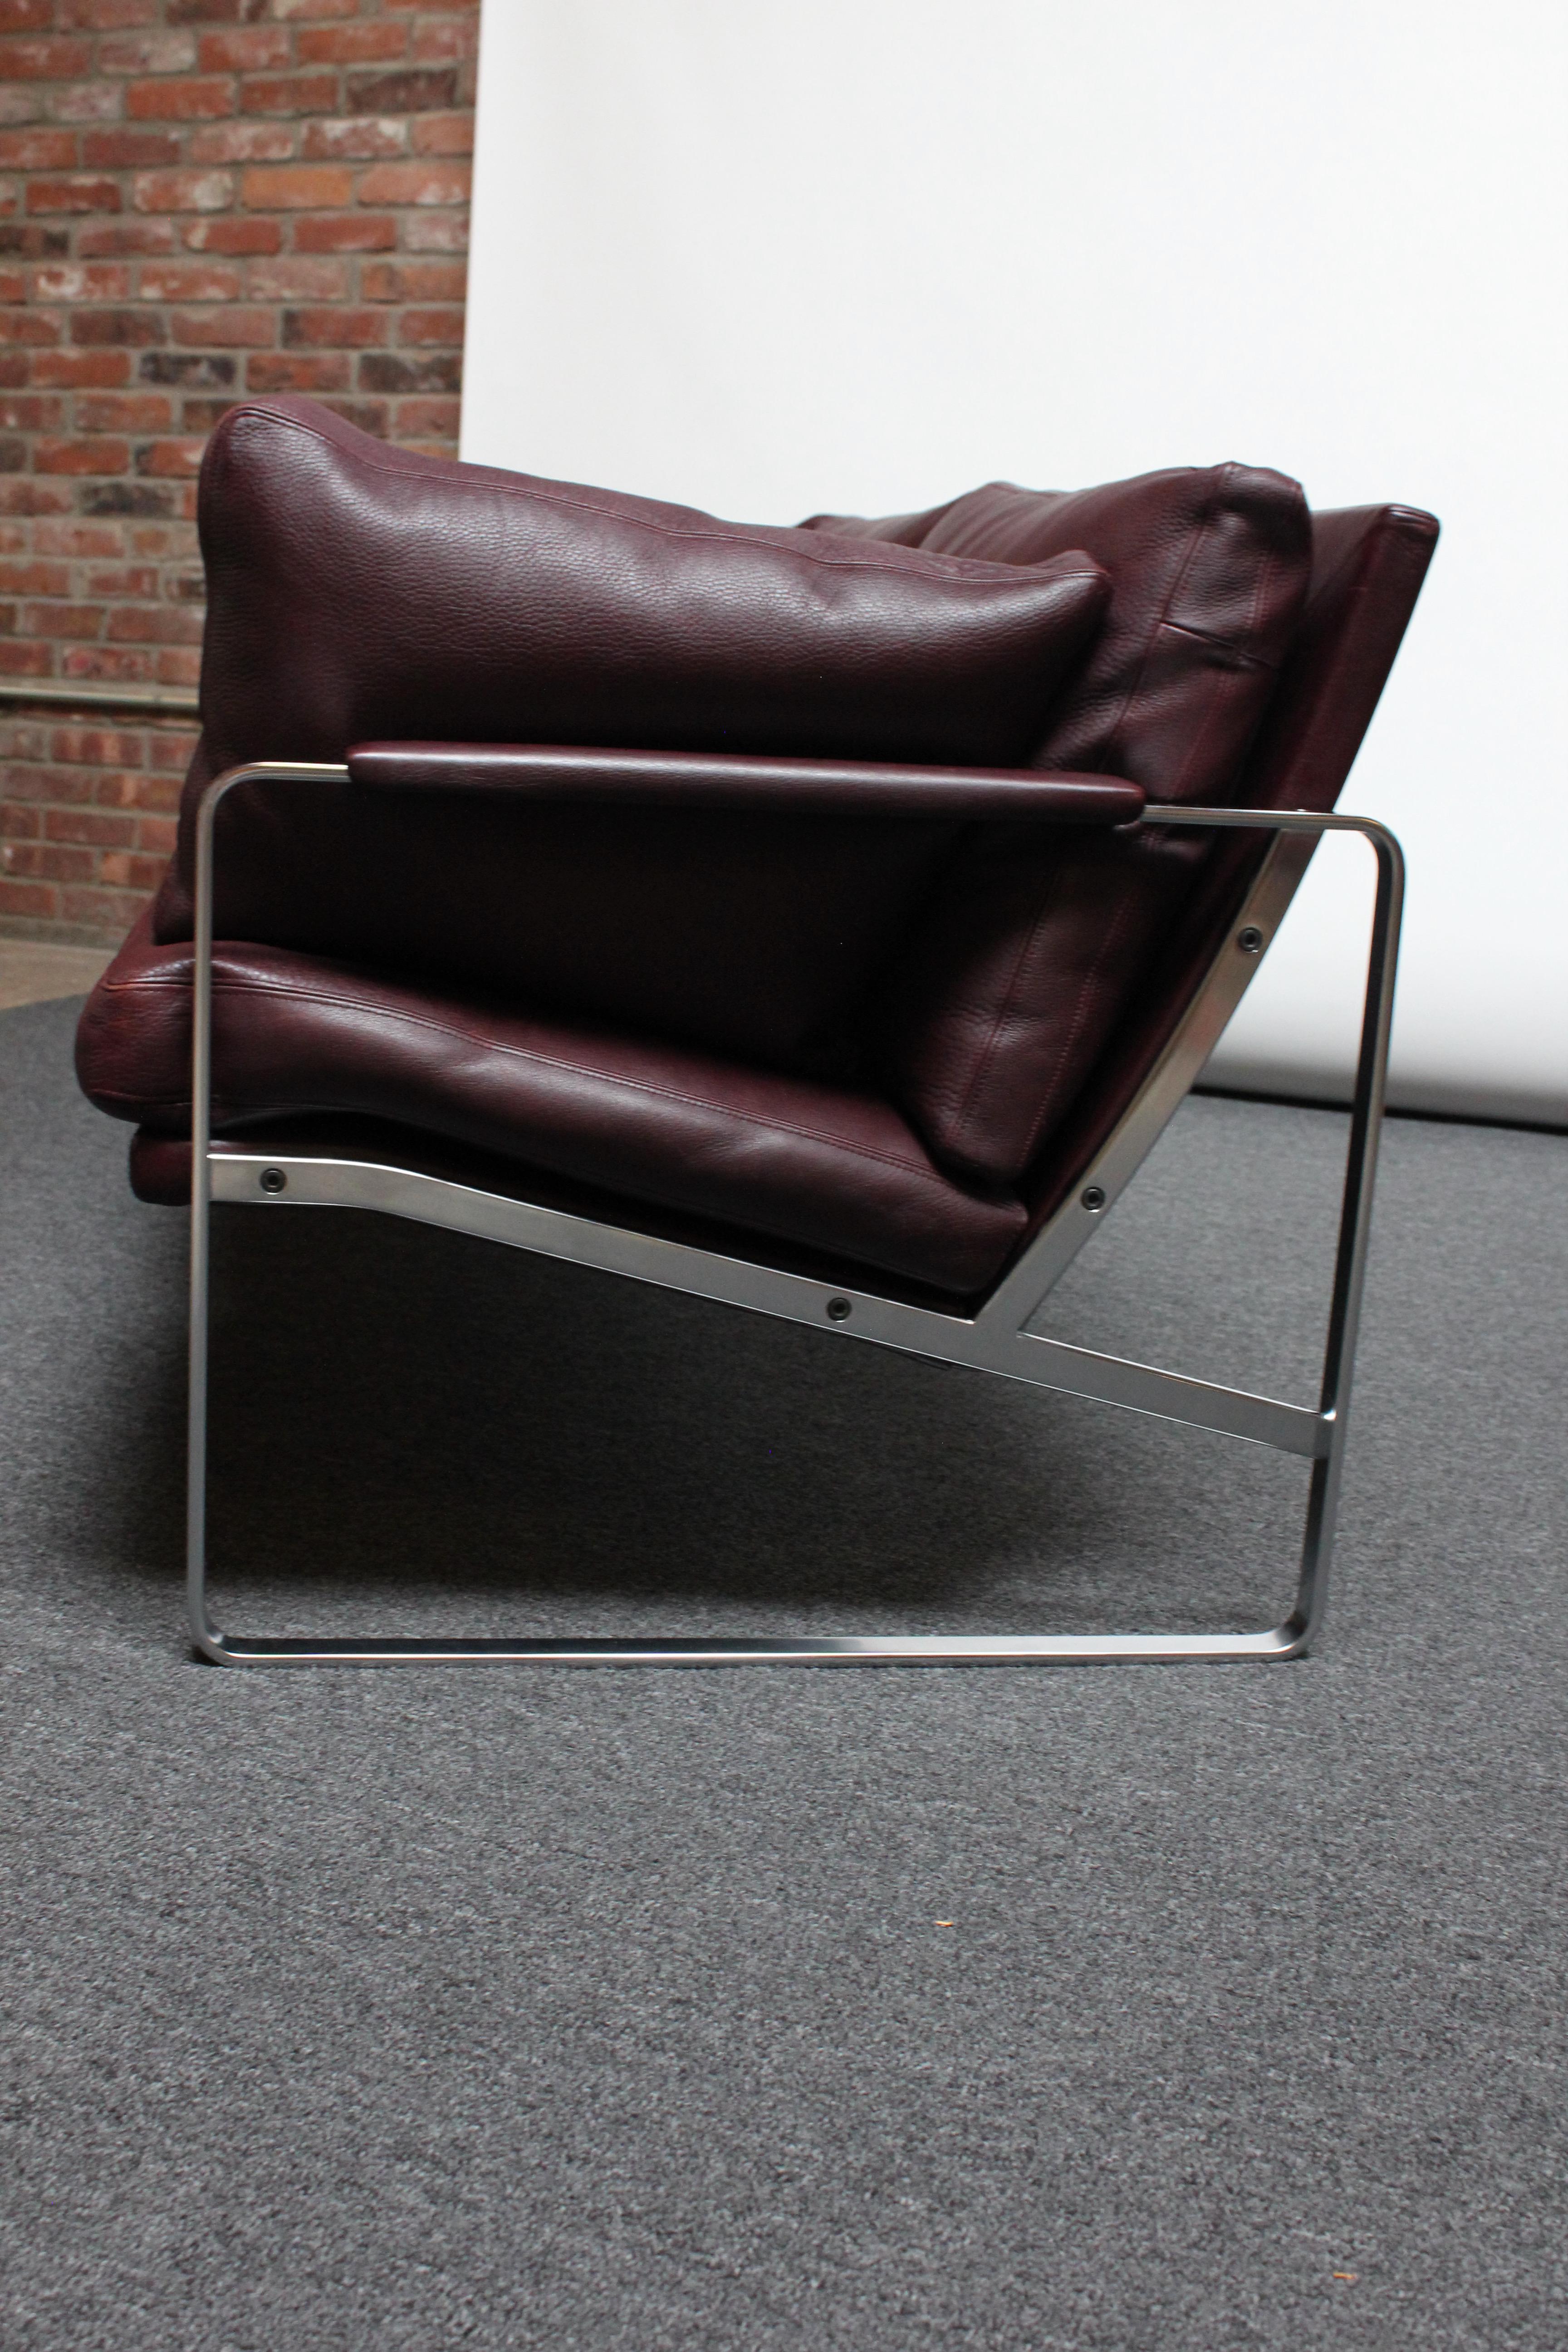 Preben Fabricius for Walter Knoll Cordovan Leather and Chromed Steel Sofa  In Good Condition For Sale In Brooklyn, NY